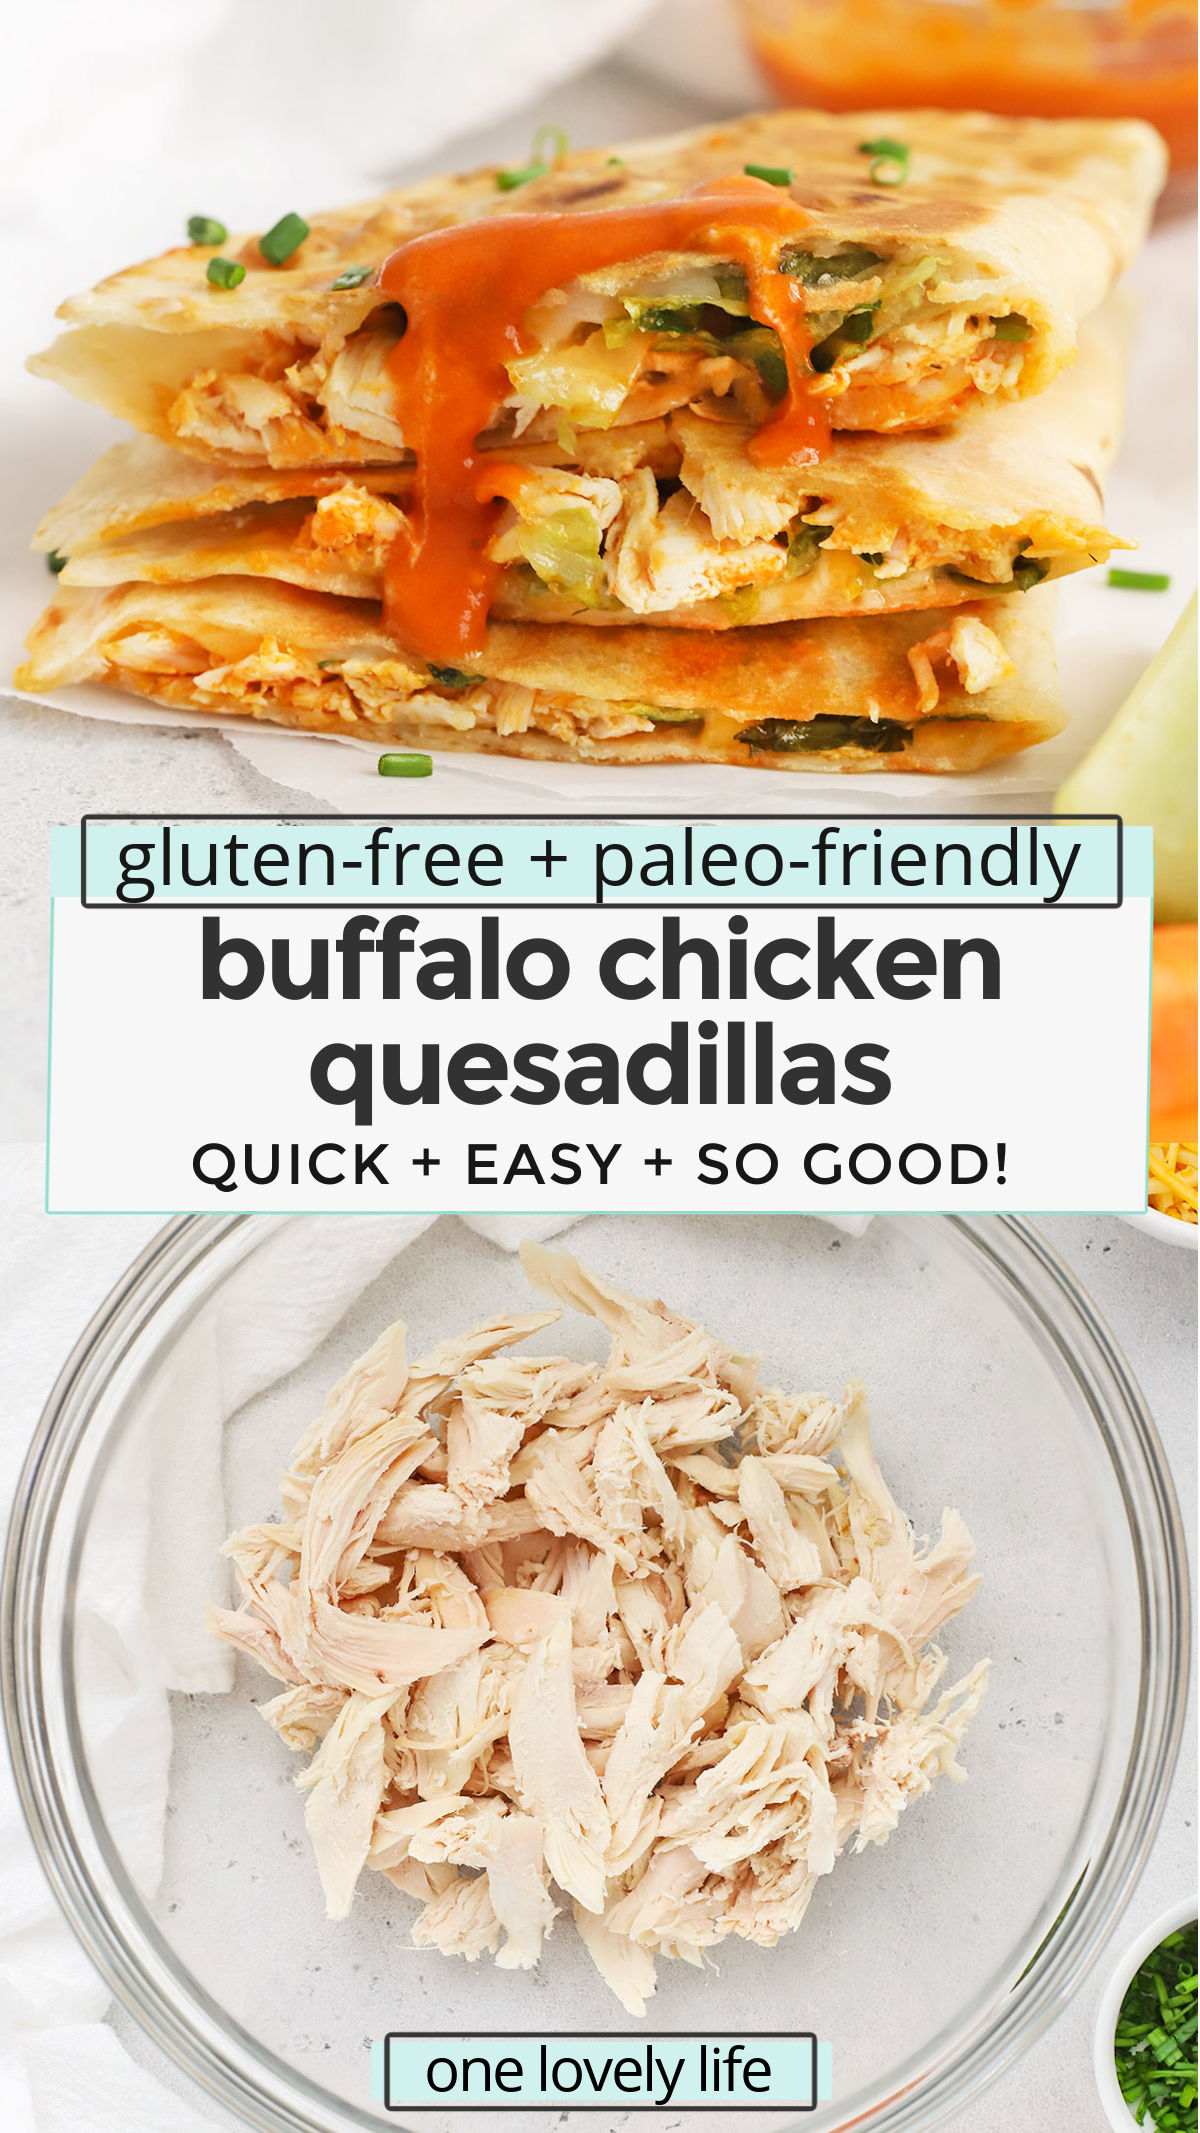 Buffalo Chicken Quesadillas - These gluten-free quesadillas are stuffed with Buffalo chicken, creamy ranch, lettuce, and your favorite cheese. They're quick, easy, and MAJORLY delicious! (Gluten-Free, Grain-Free Friendly // Buffalo Quesadillas // Buffalo Chicken Recipes #quesadillas #glutenfree #buffalochicken